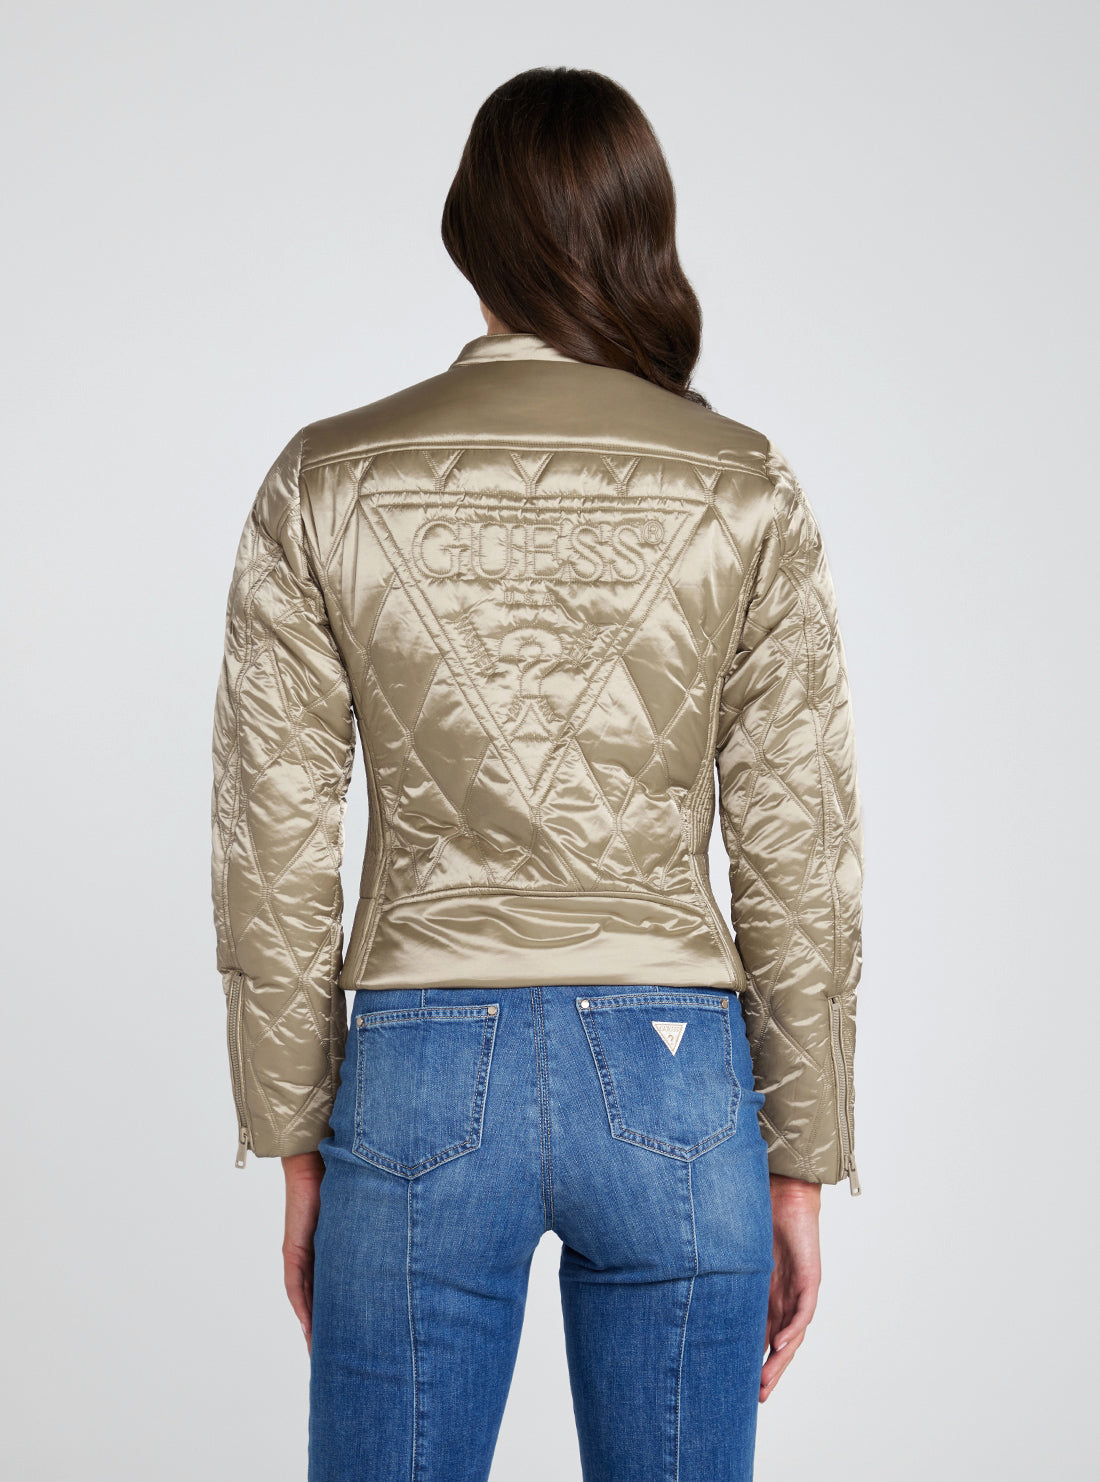 GUESS Eco Gold New Marine Jacket back view